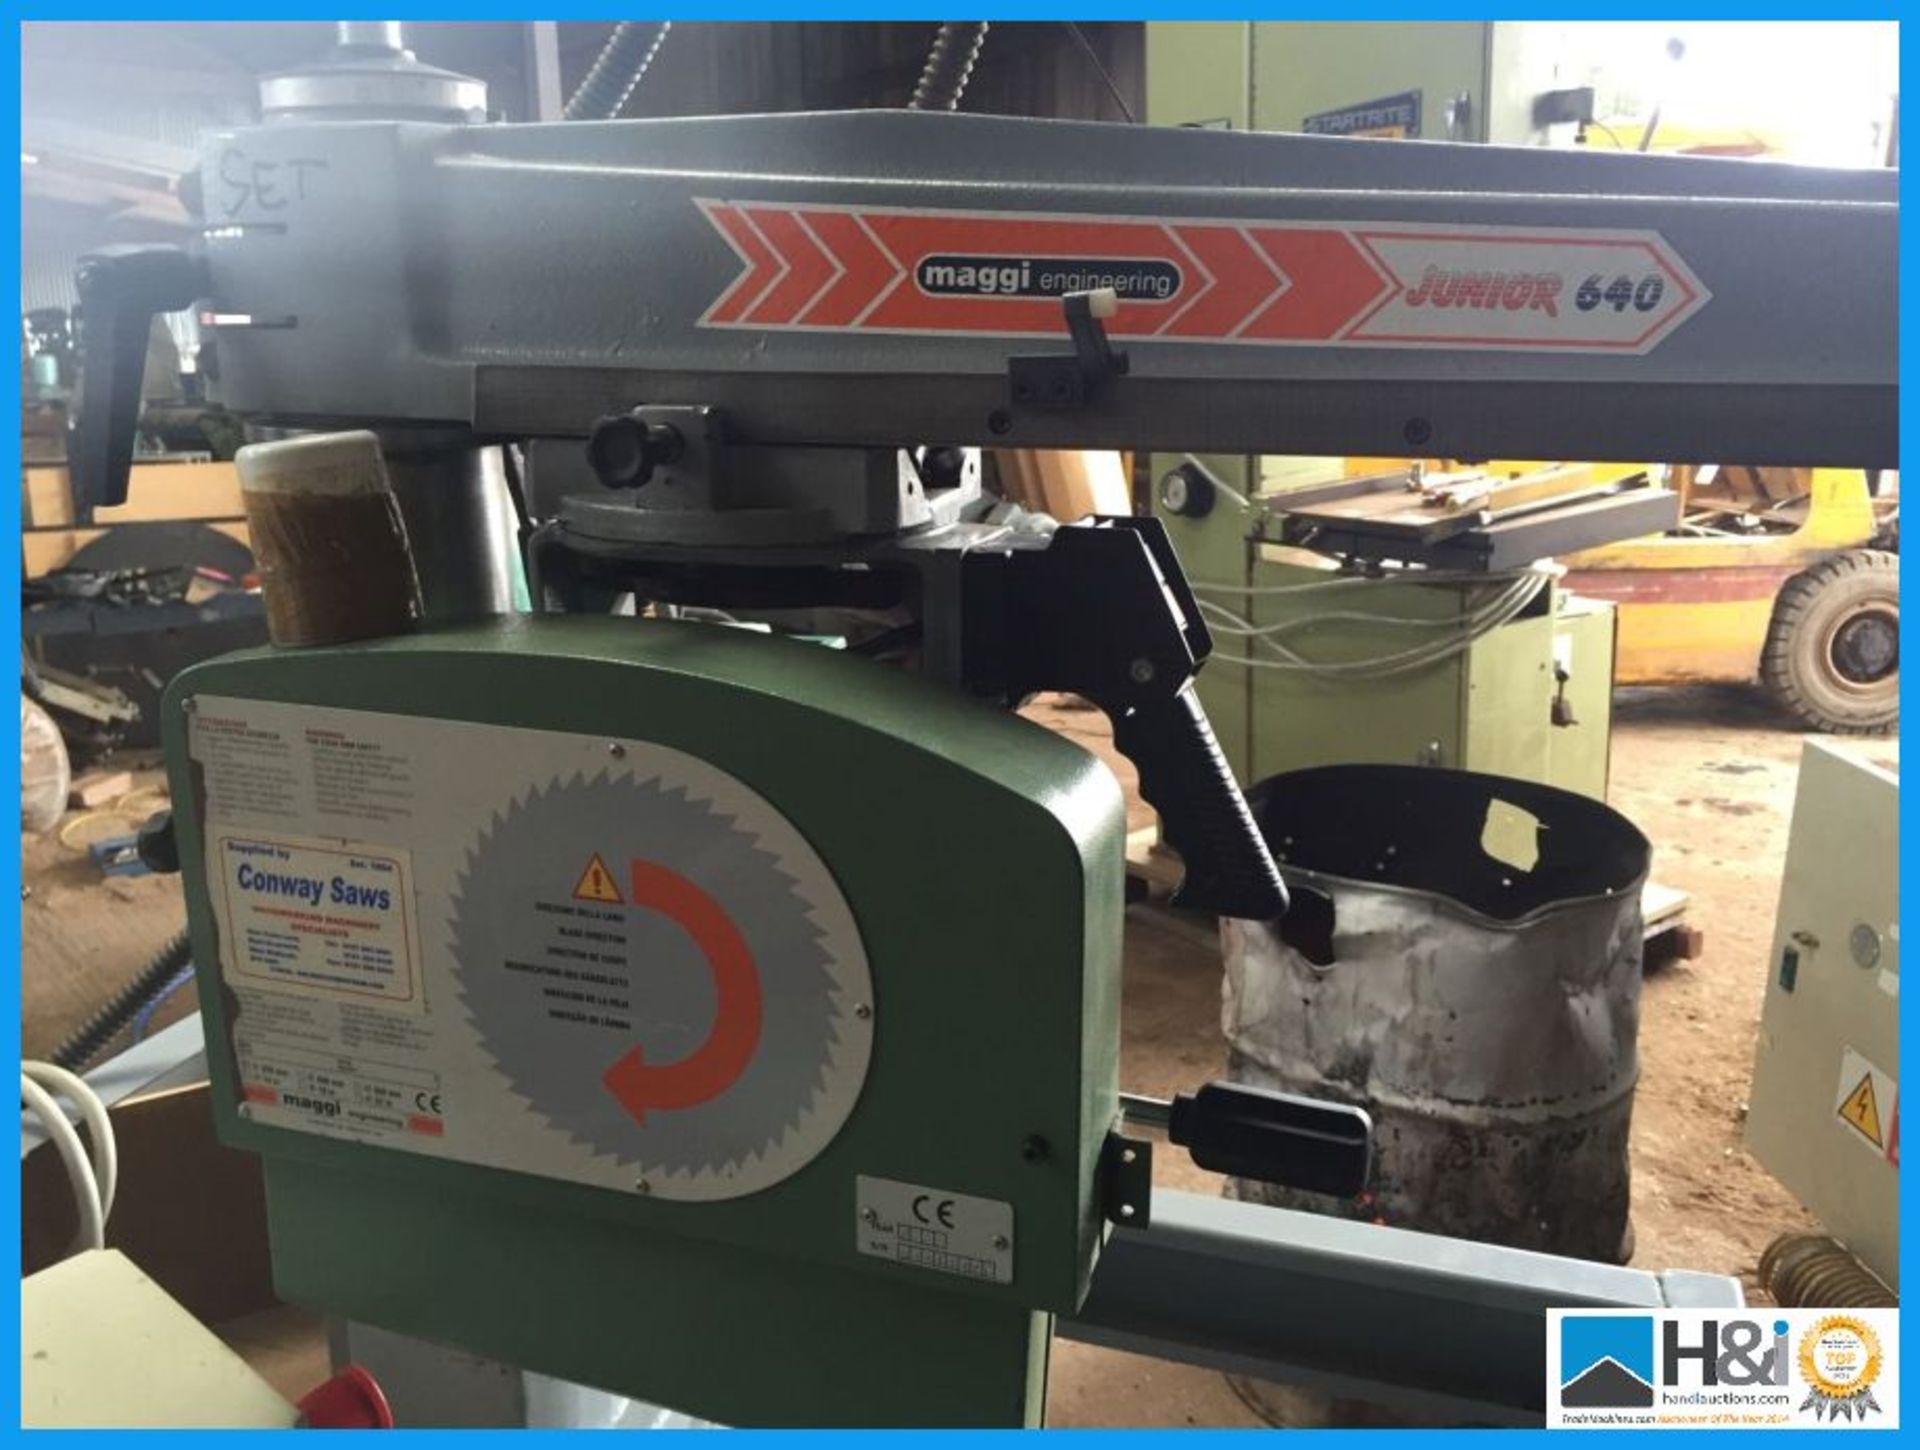 Maggie Junior 640 radial arm crosscut saw. It has a brake fitted and has been tested. Appraisal: - Image 6 of 10